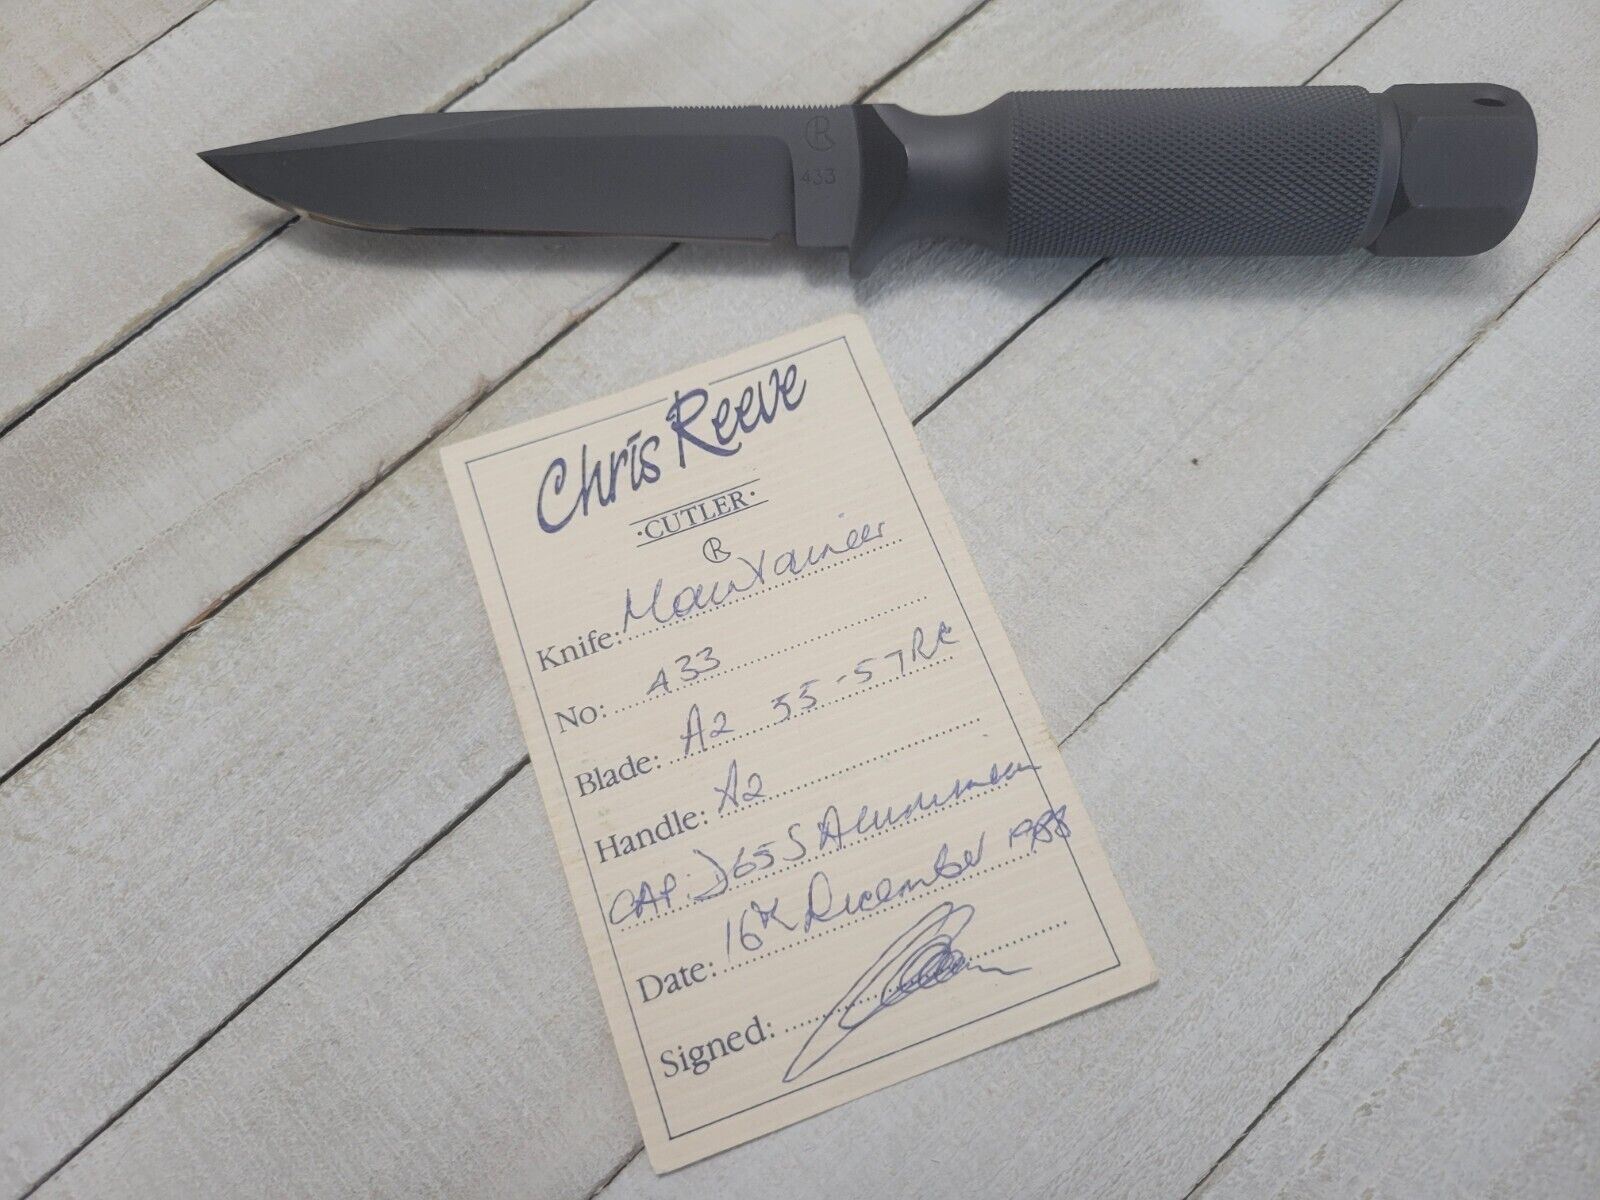 1988 Early South Africa Chris Reeve Knives Mountaineer A2 OPK Numbered 433